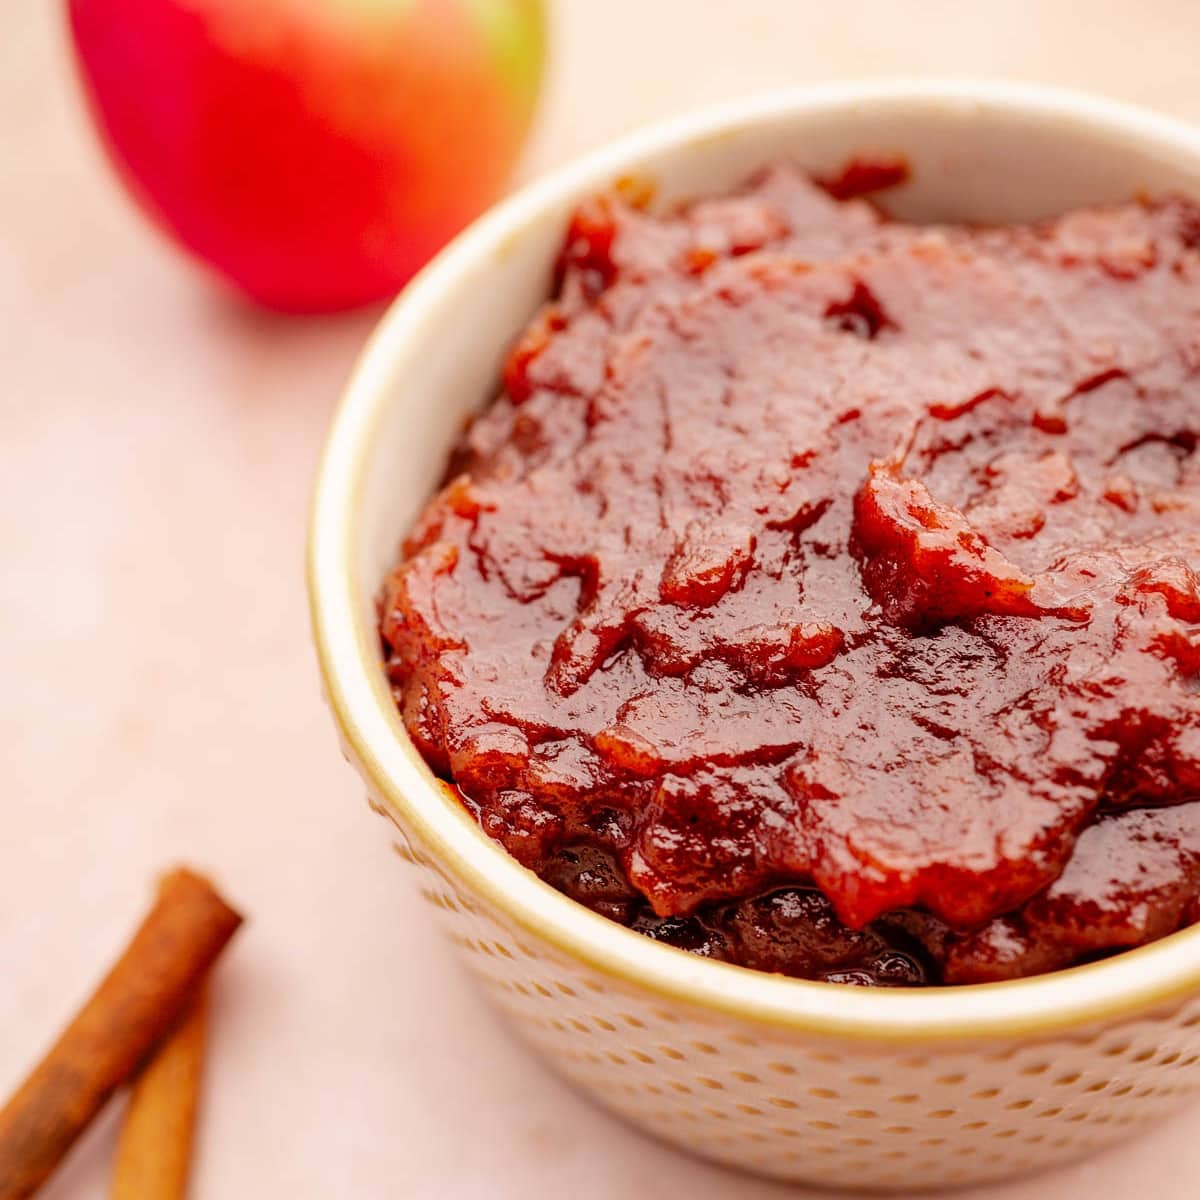 Slow cooker apple butter with cinnamon sticks.